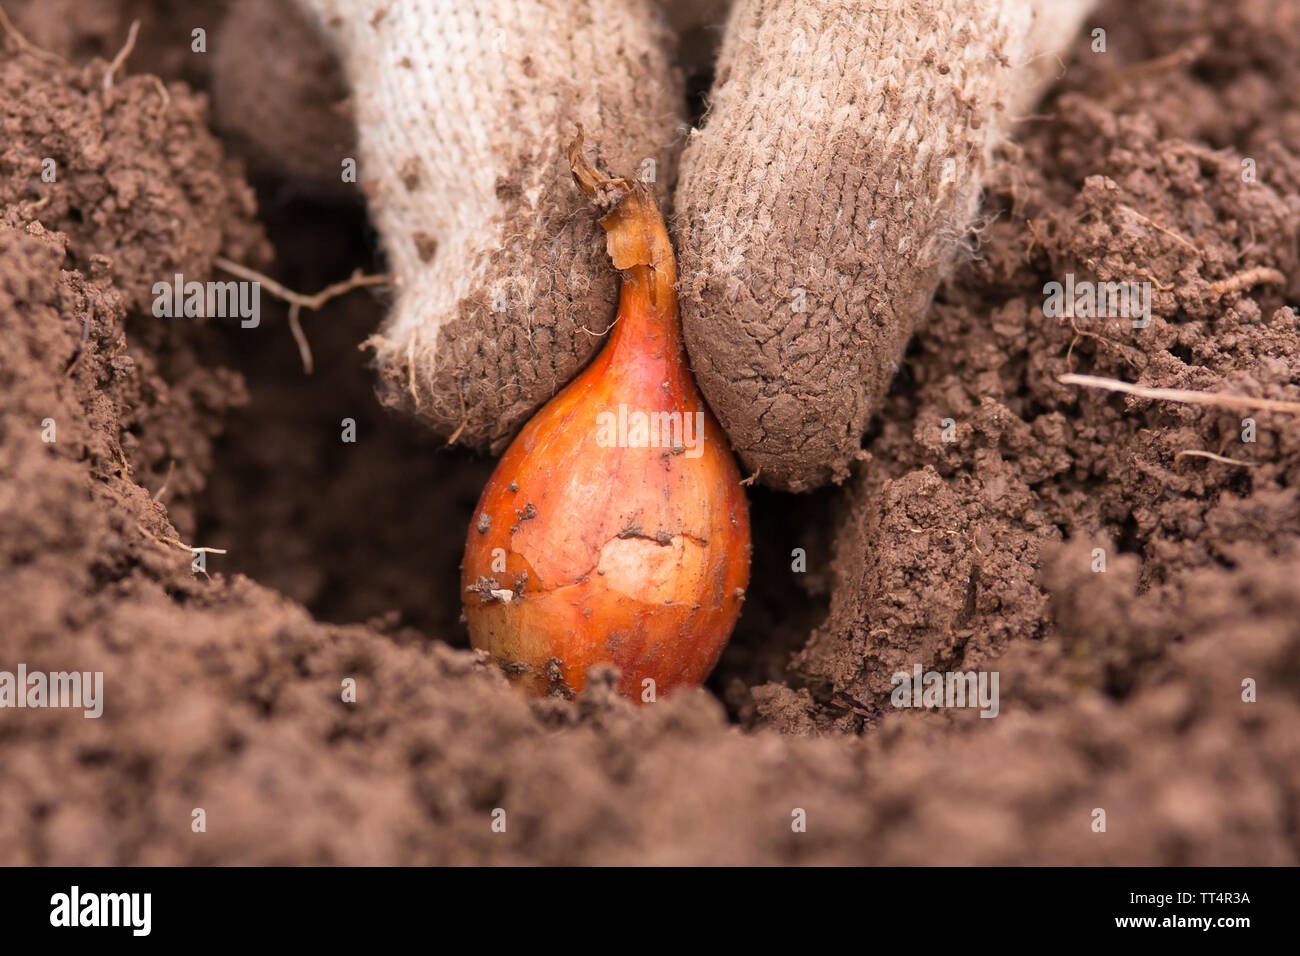 hand in glove planting onion in the vegetable garden Stock Photo